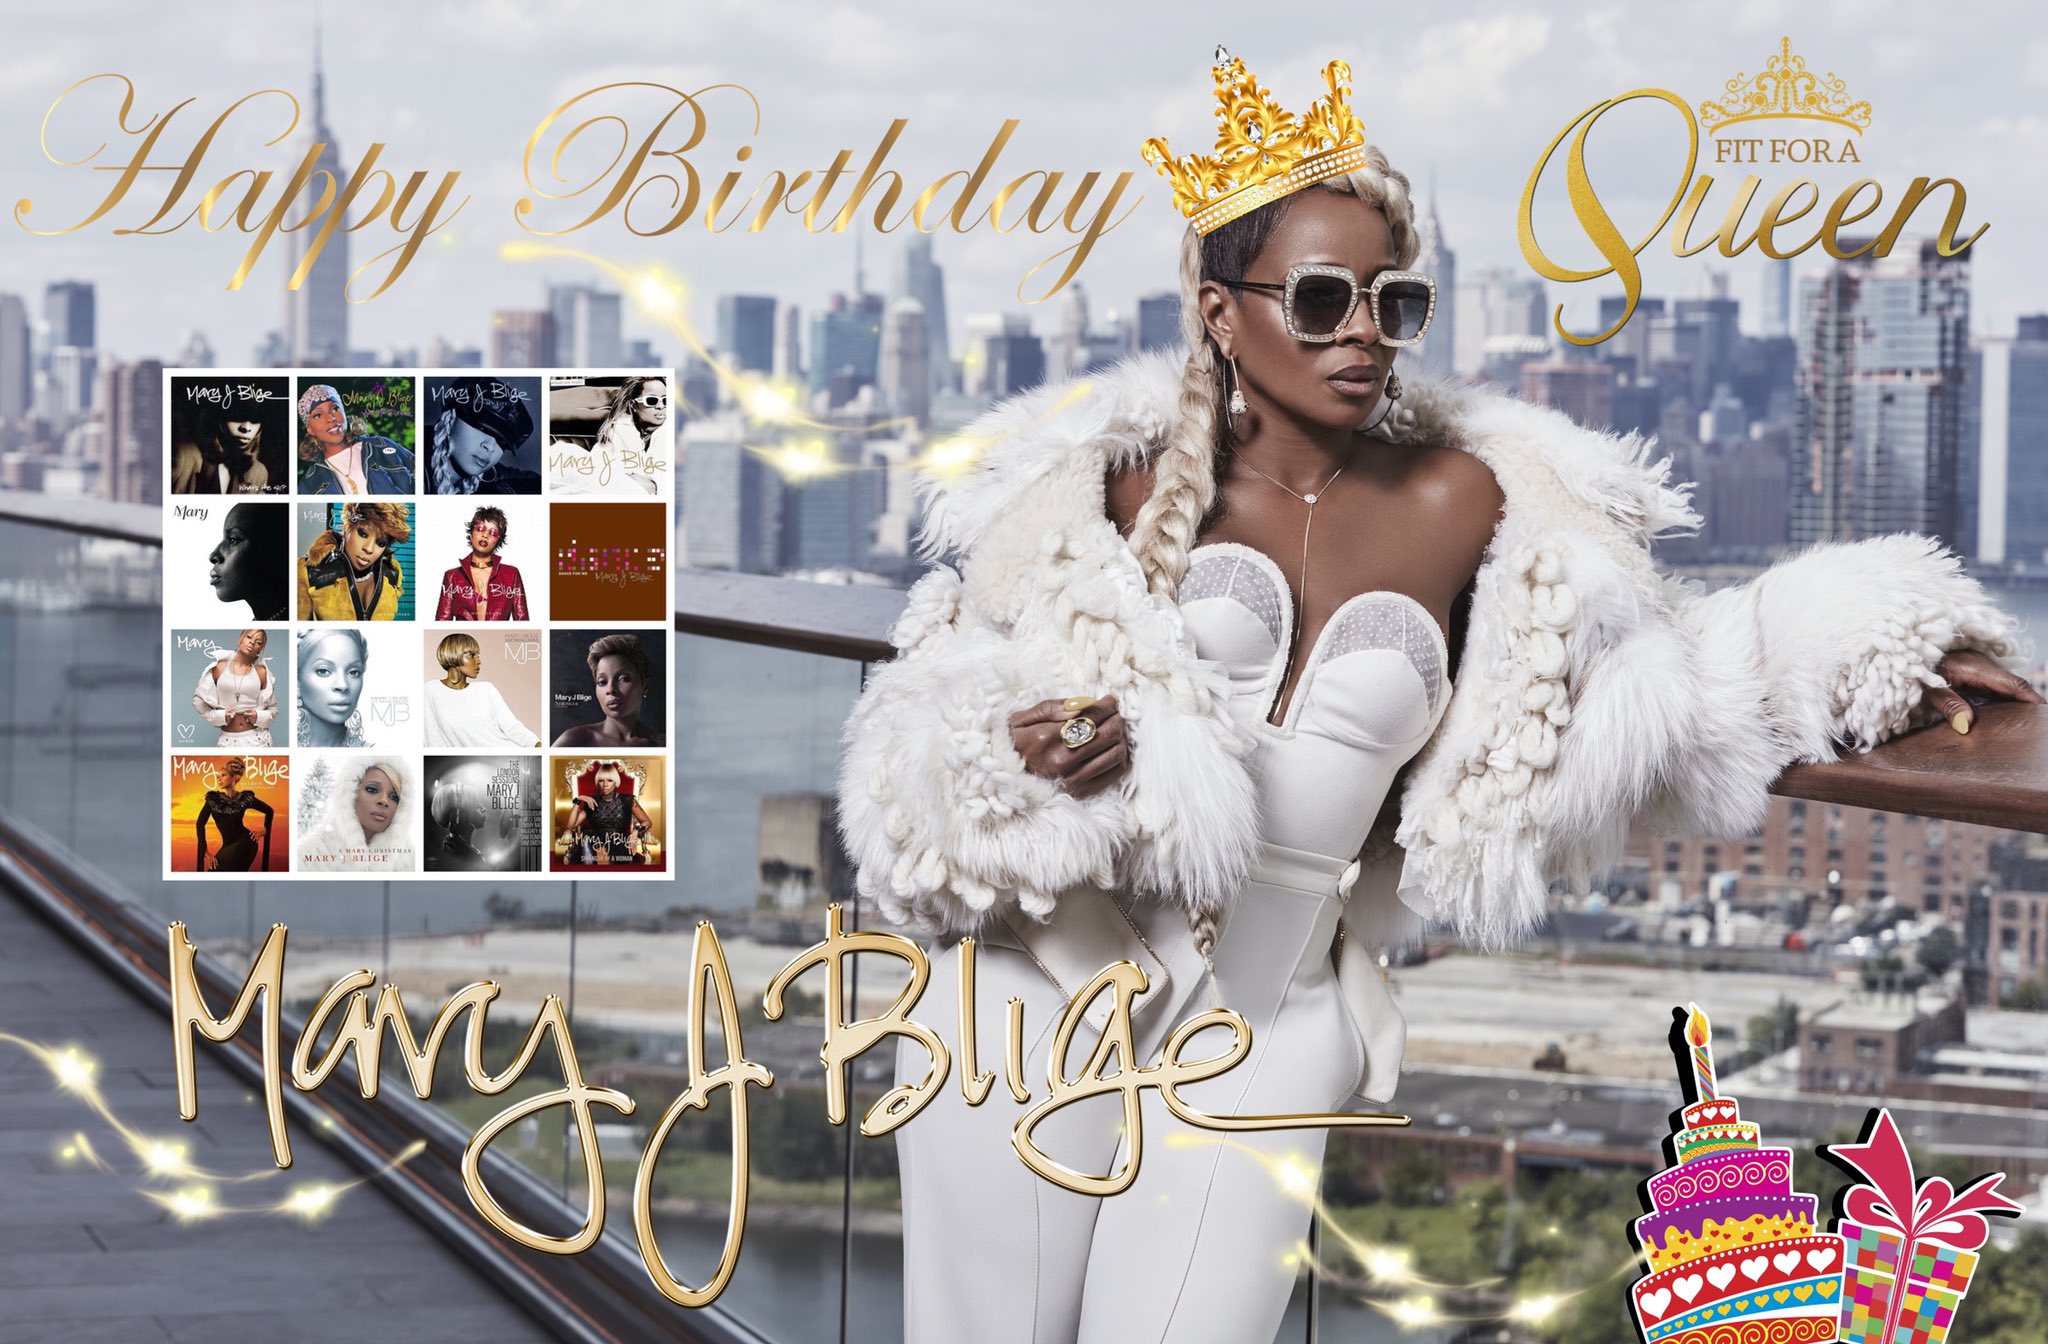 Happy Birthday To My Queen Mary J.Blige   Love You MaMa    2019.1.11    